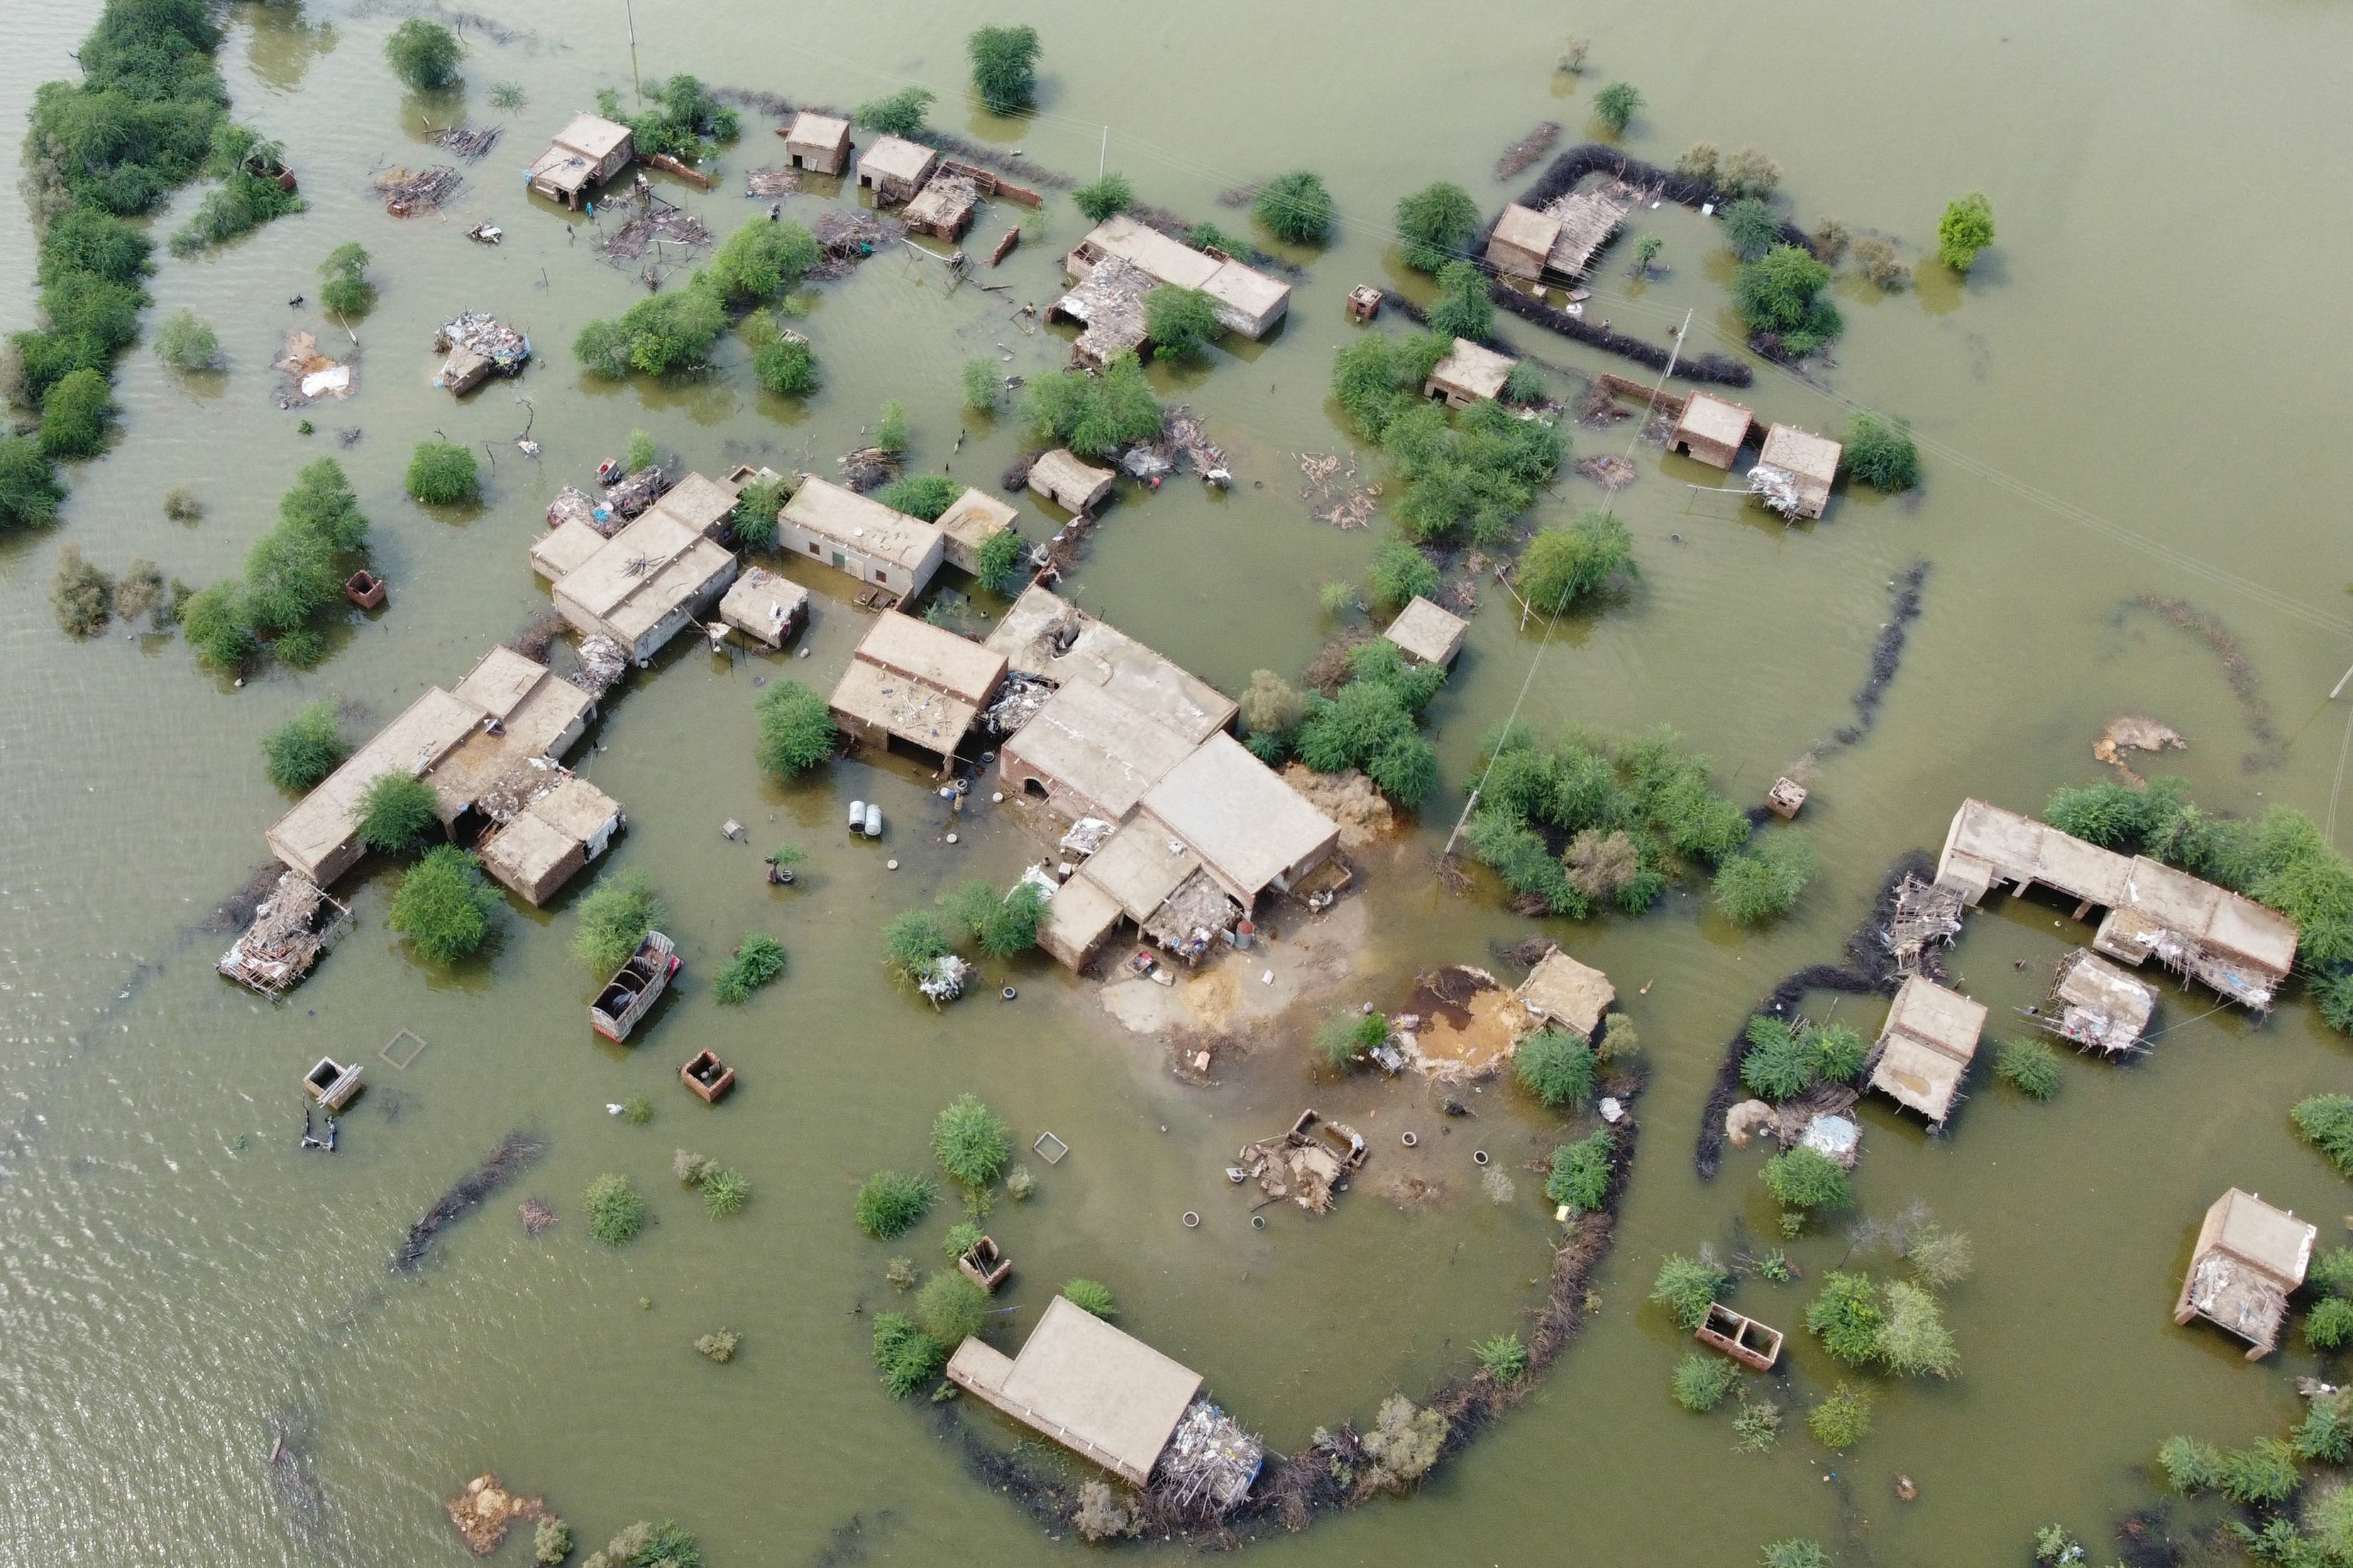 An aerial shot of a flooded residential area. The roofs of houses and the very tops of trees poke out from a green body of water.